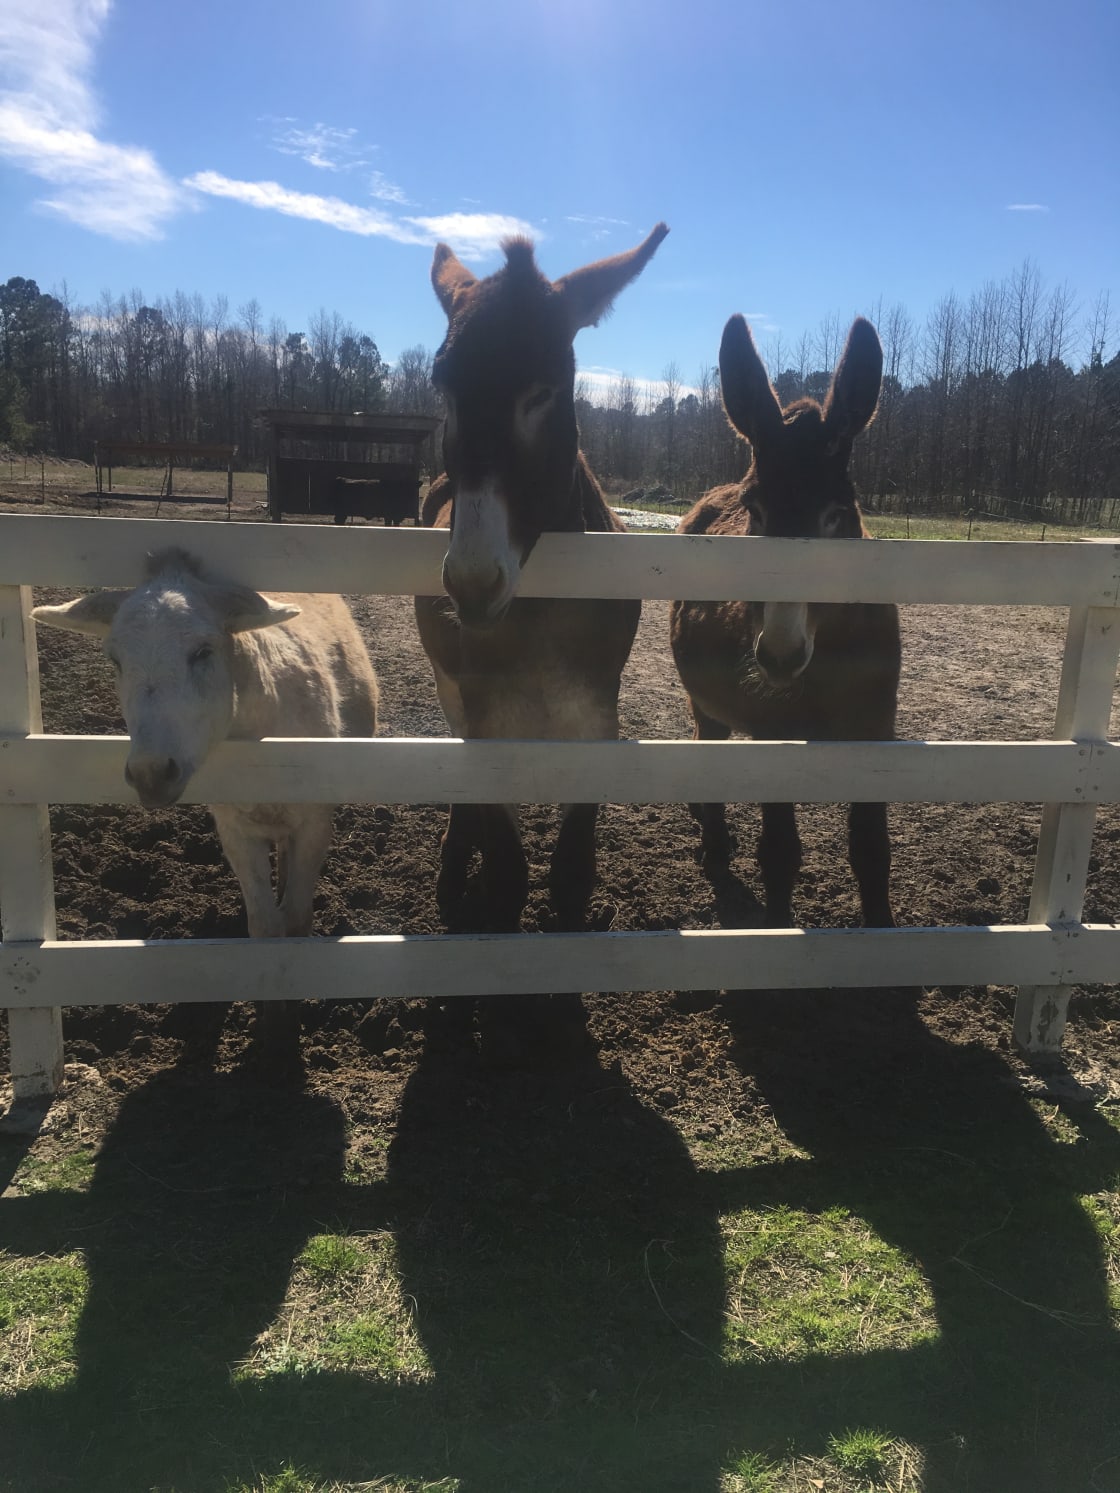 Meet our (rescue) donkeys... bring a treat when you come! An apple, carrots, watermelon, peanuts... anything from the produce market on site!